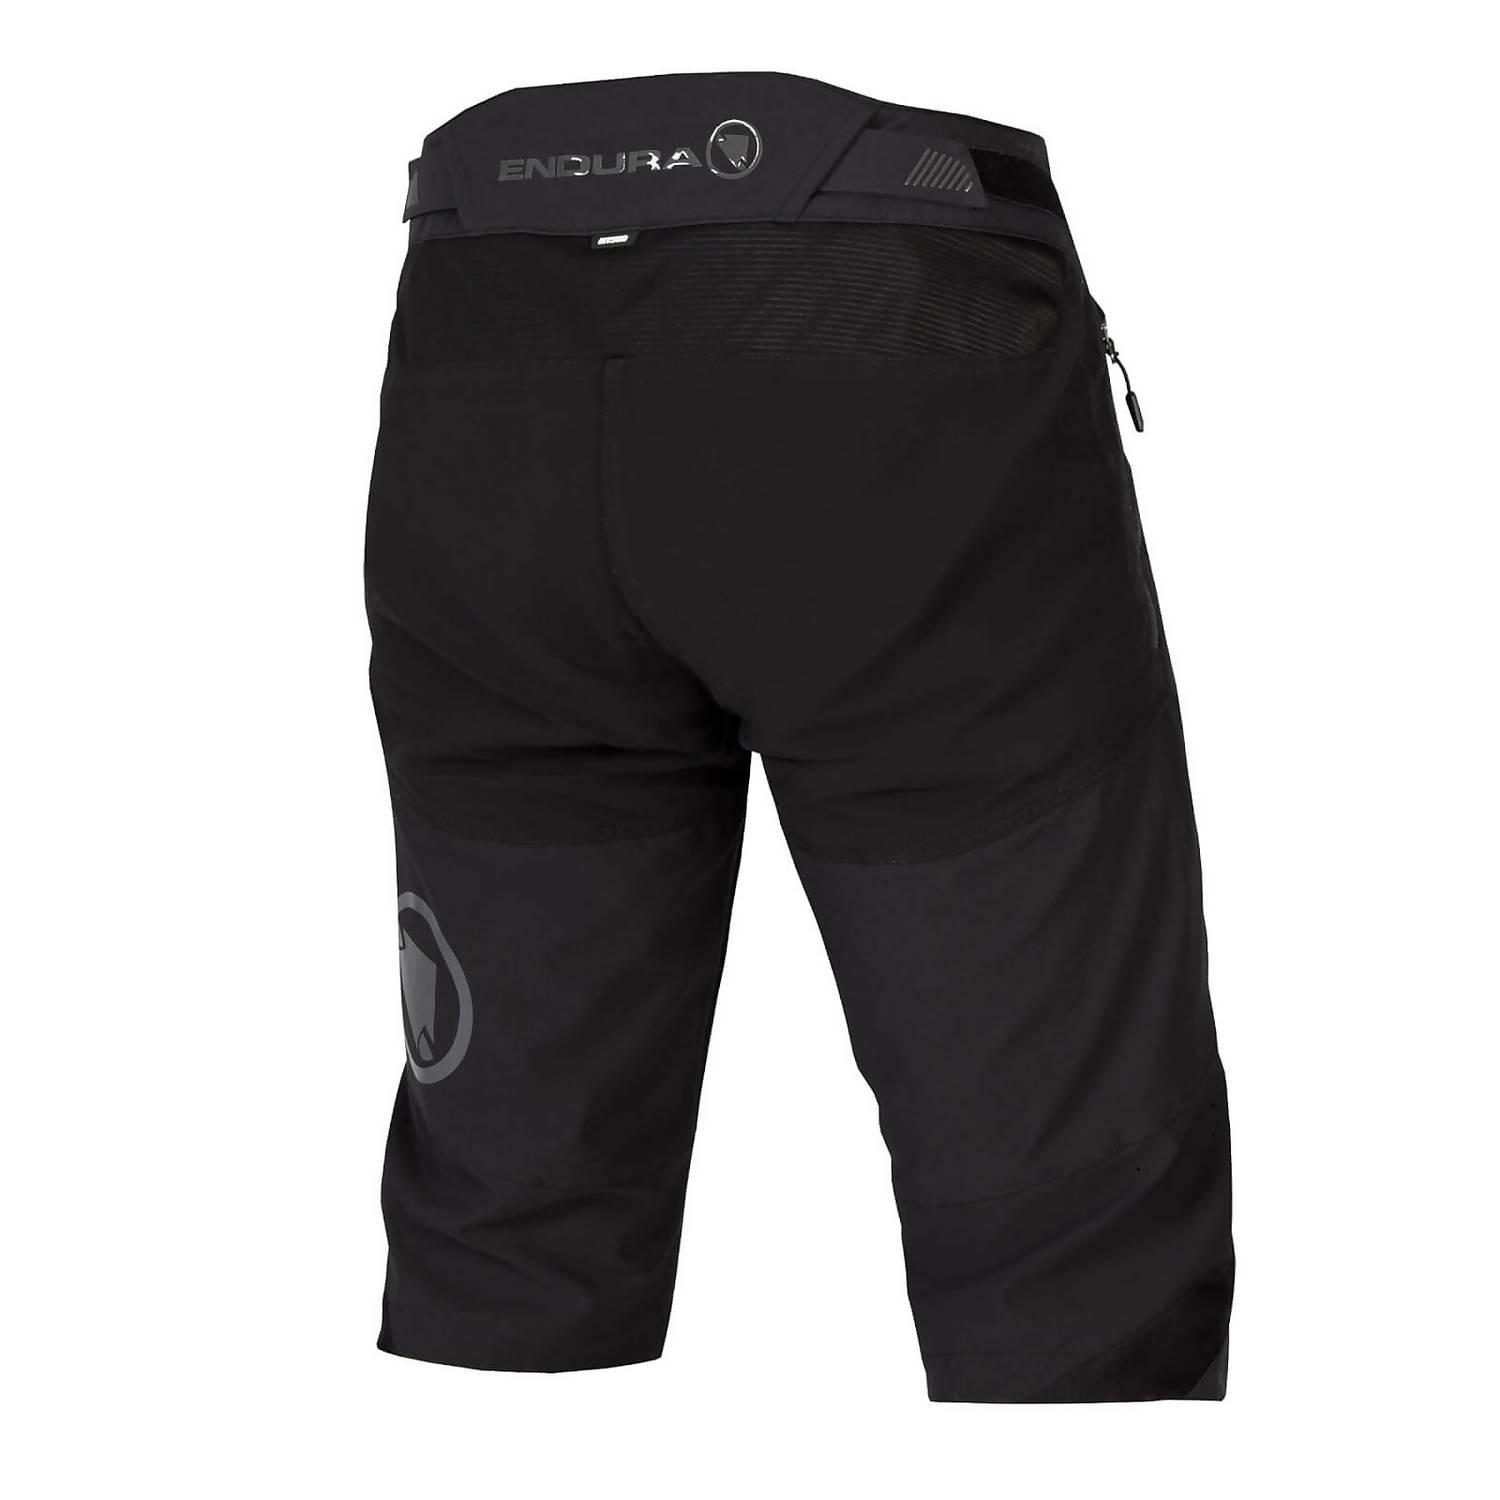 Endura launches new waterproof tights trousers and shorts